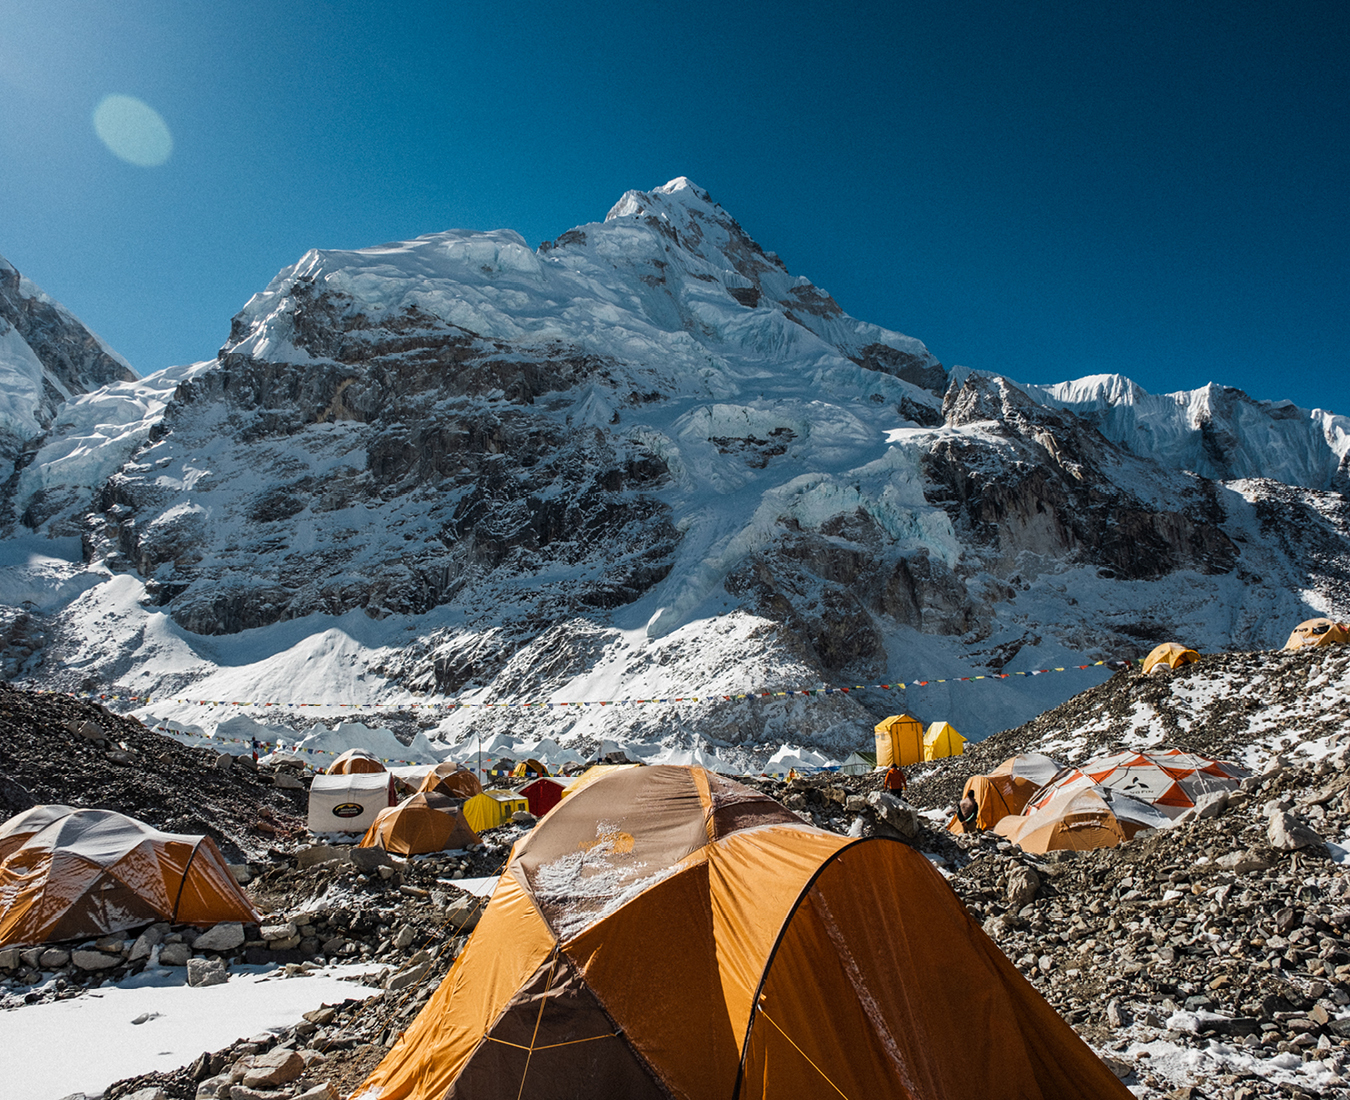 The AC tents at Everest Base Camp positioned alongside the Khumbu Icefall and under the shadow of Mount Nuptse.